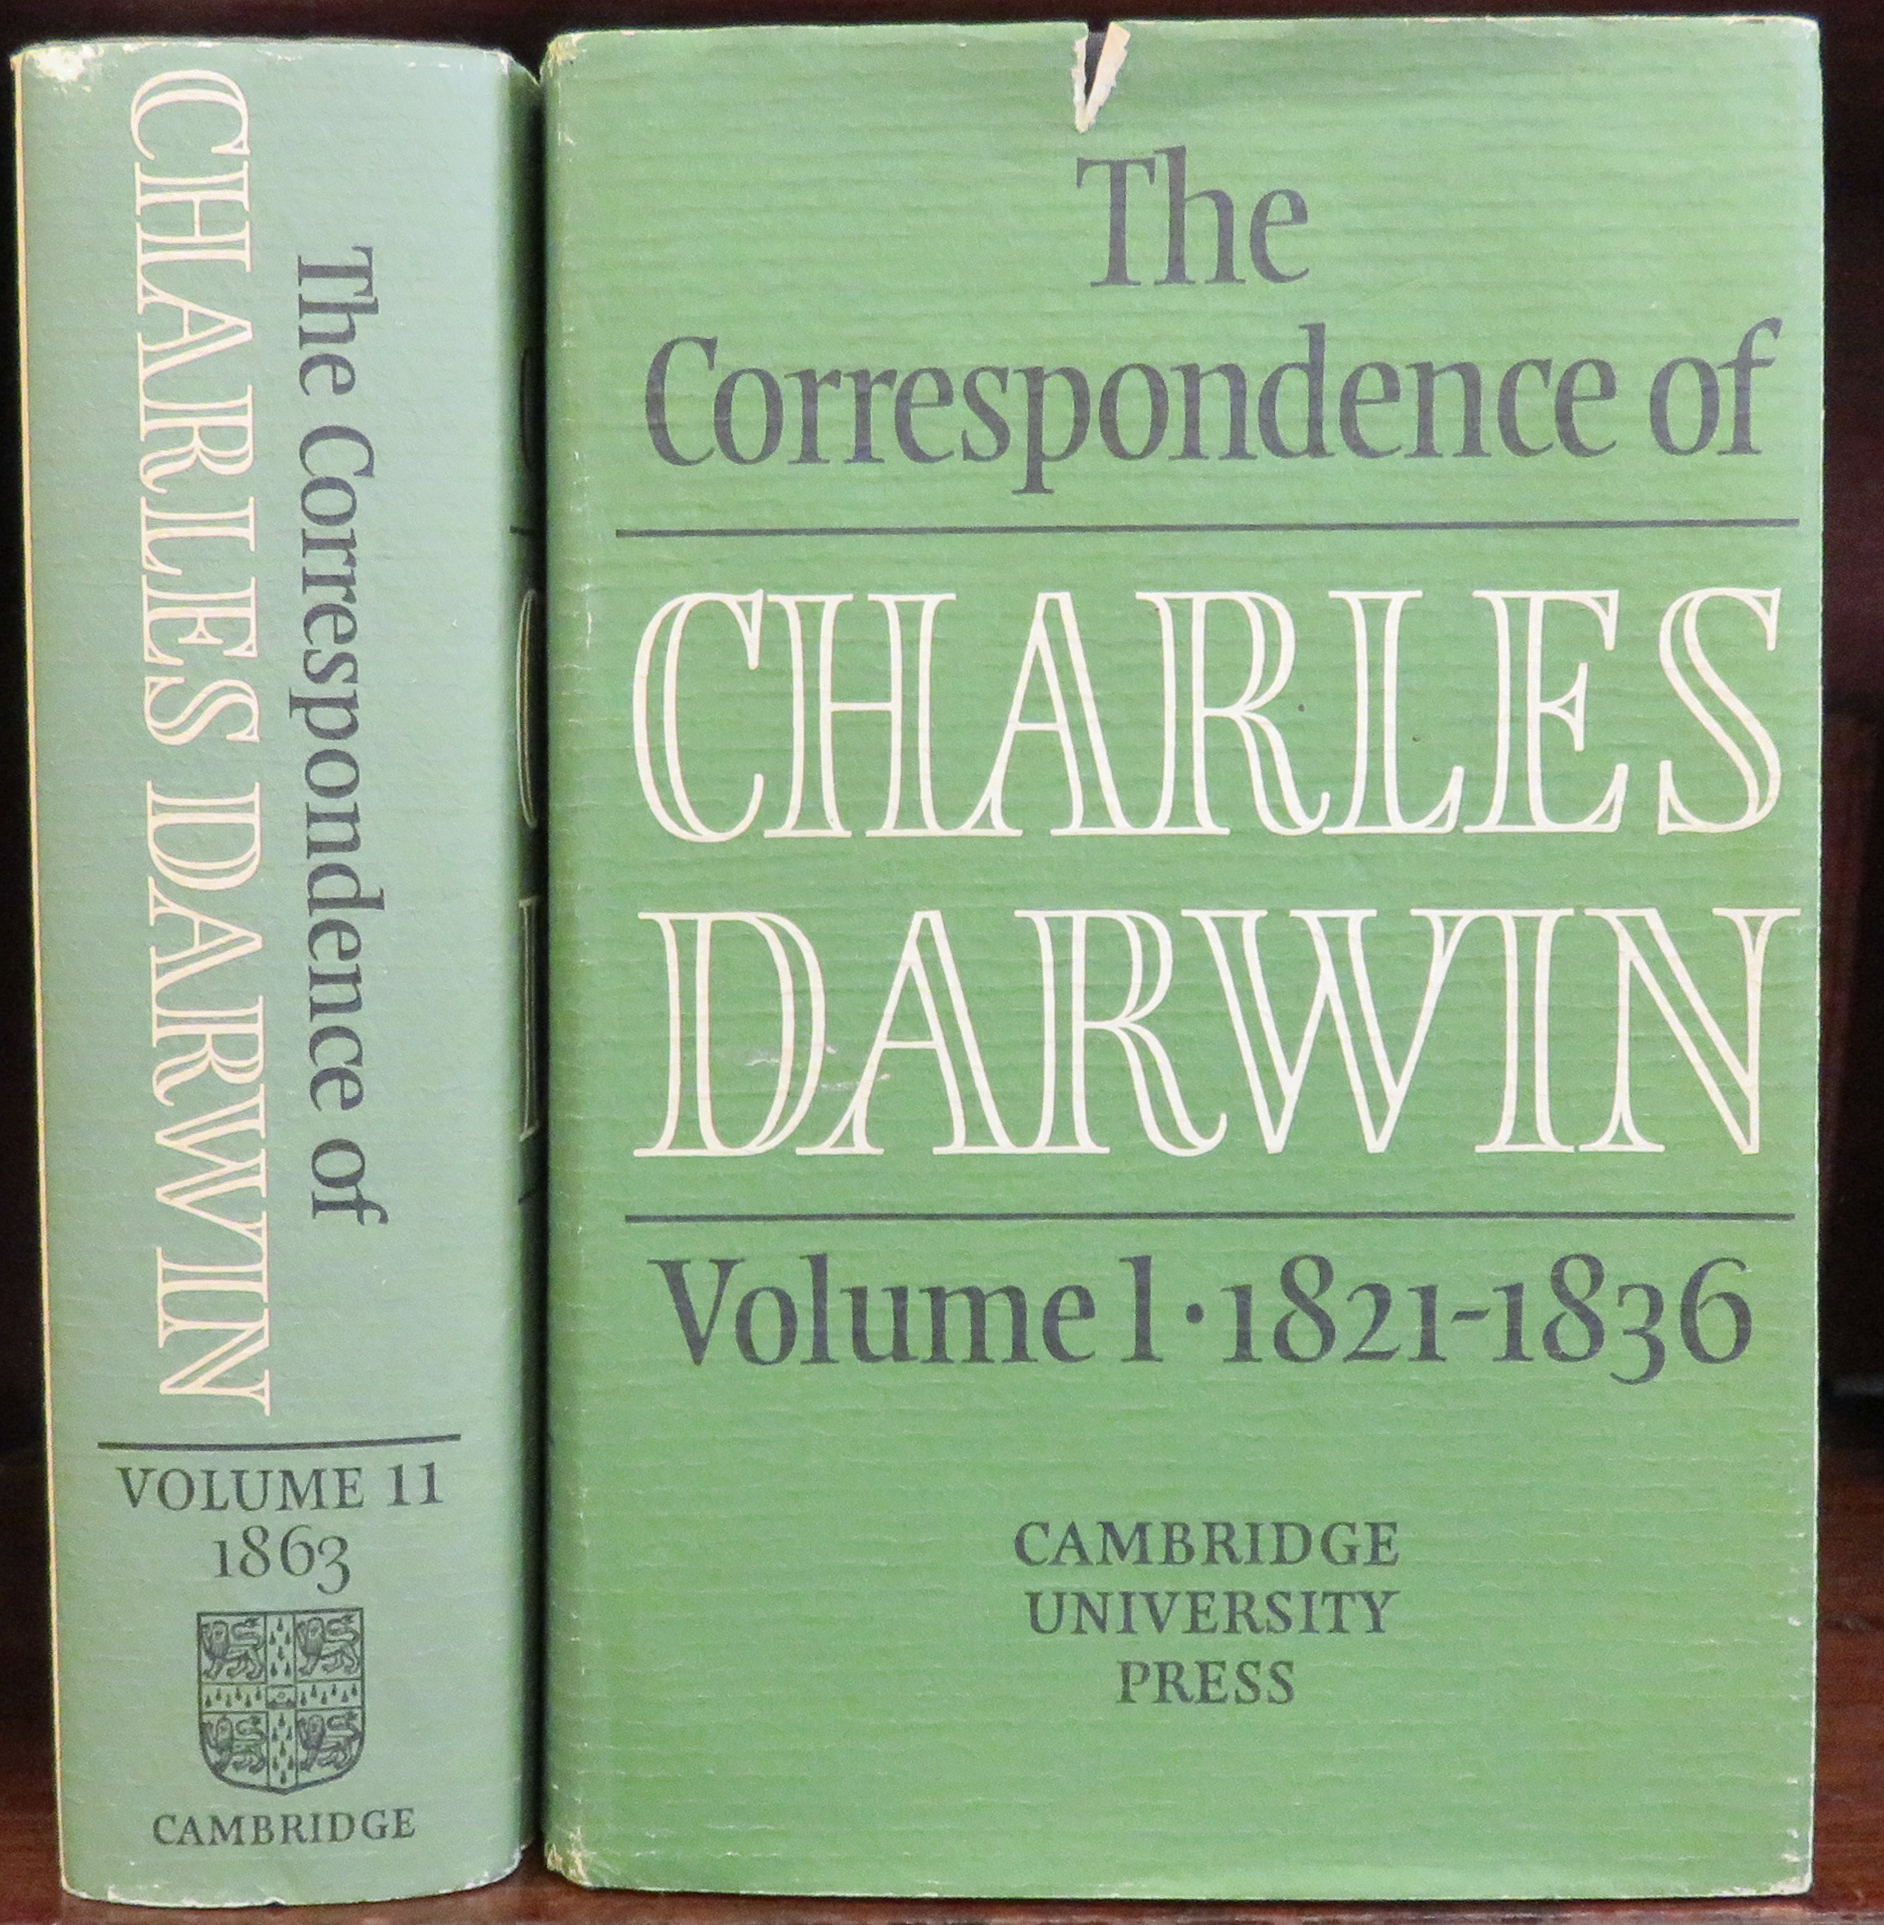 The Correspondence of Charles Darwin in two volumes 